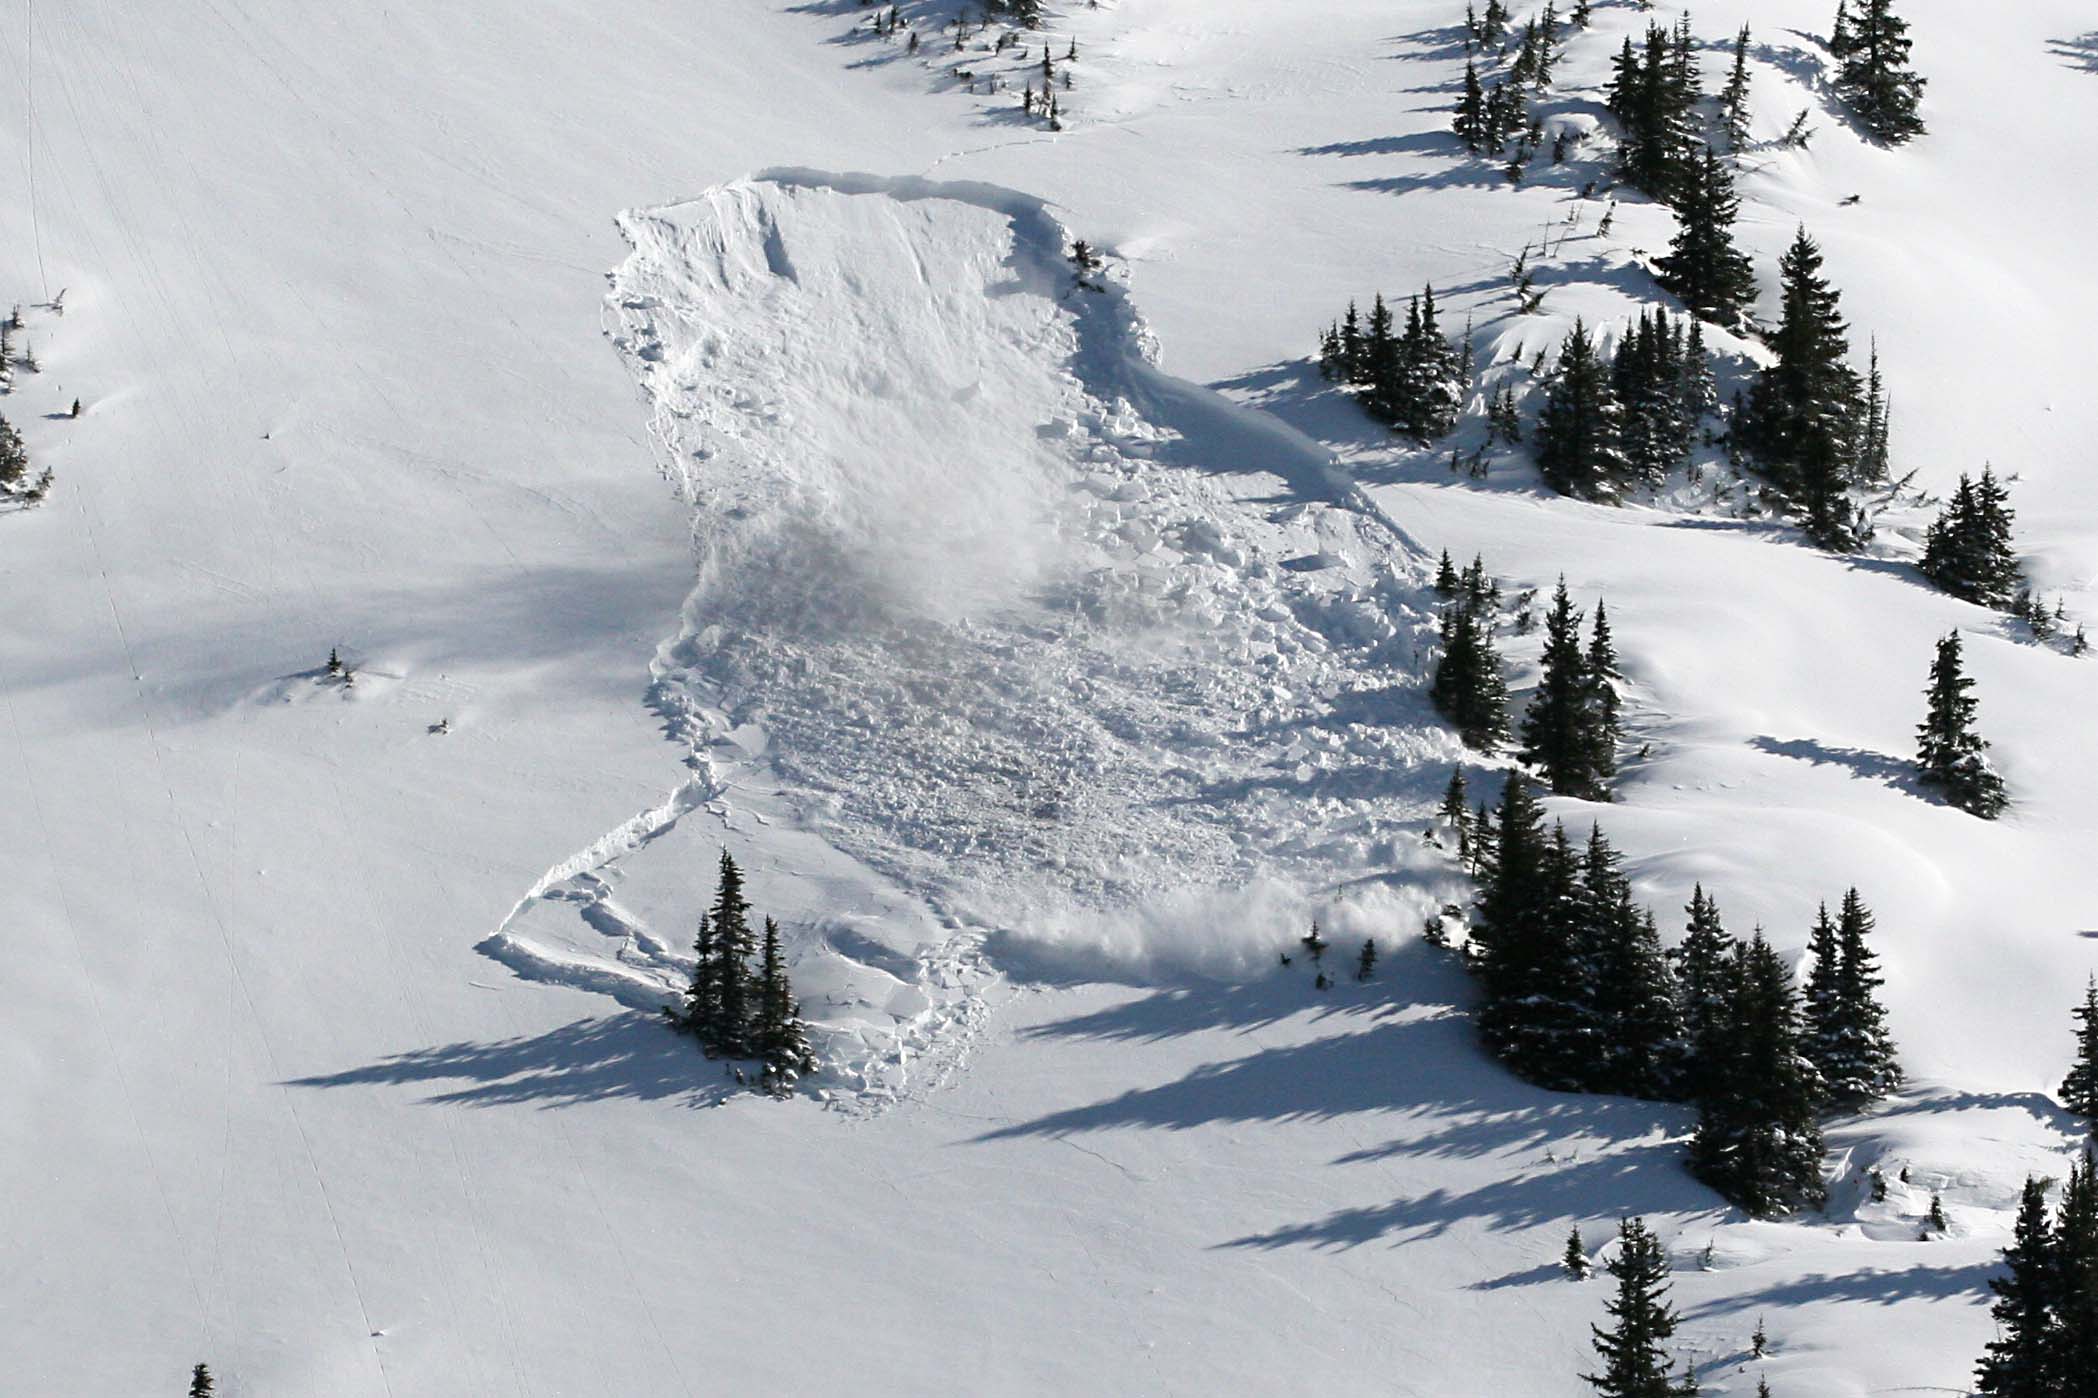 Avalanche Safety Training – January 9th-10th